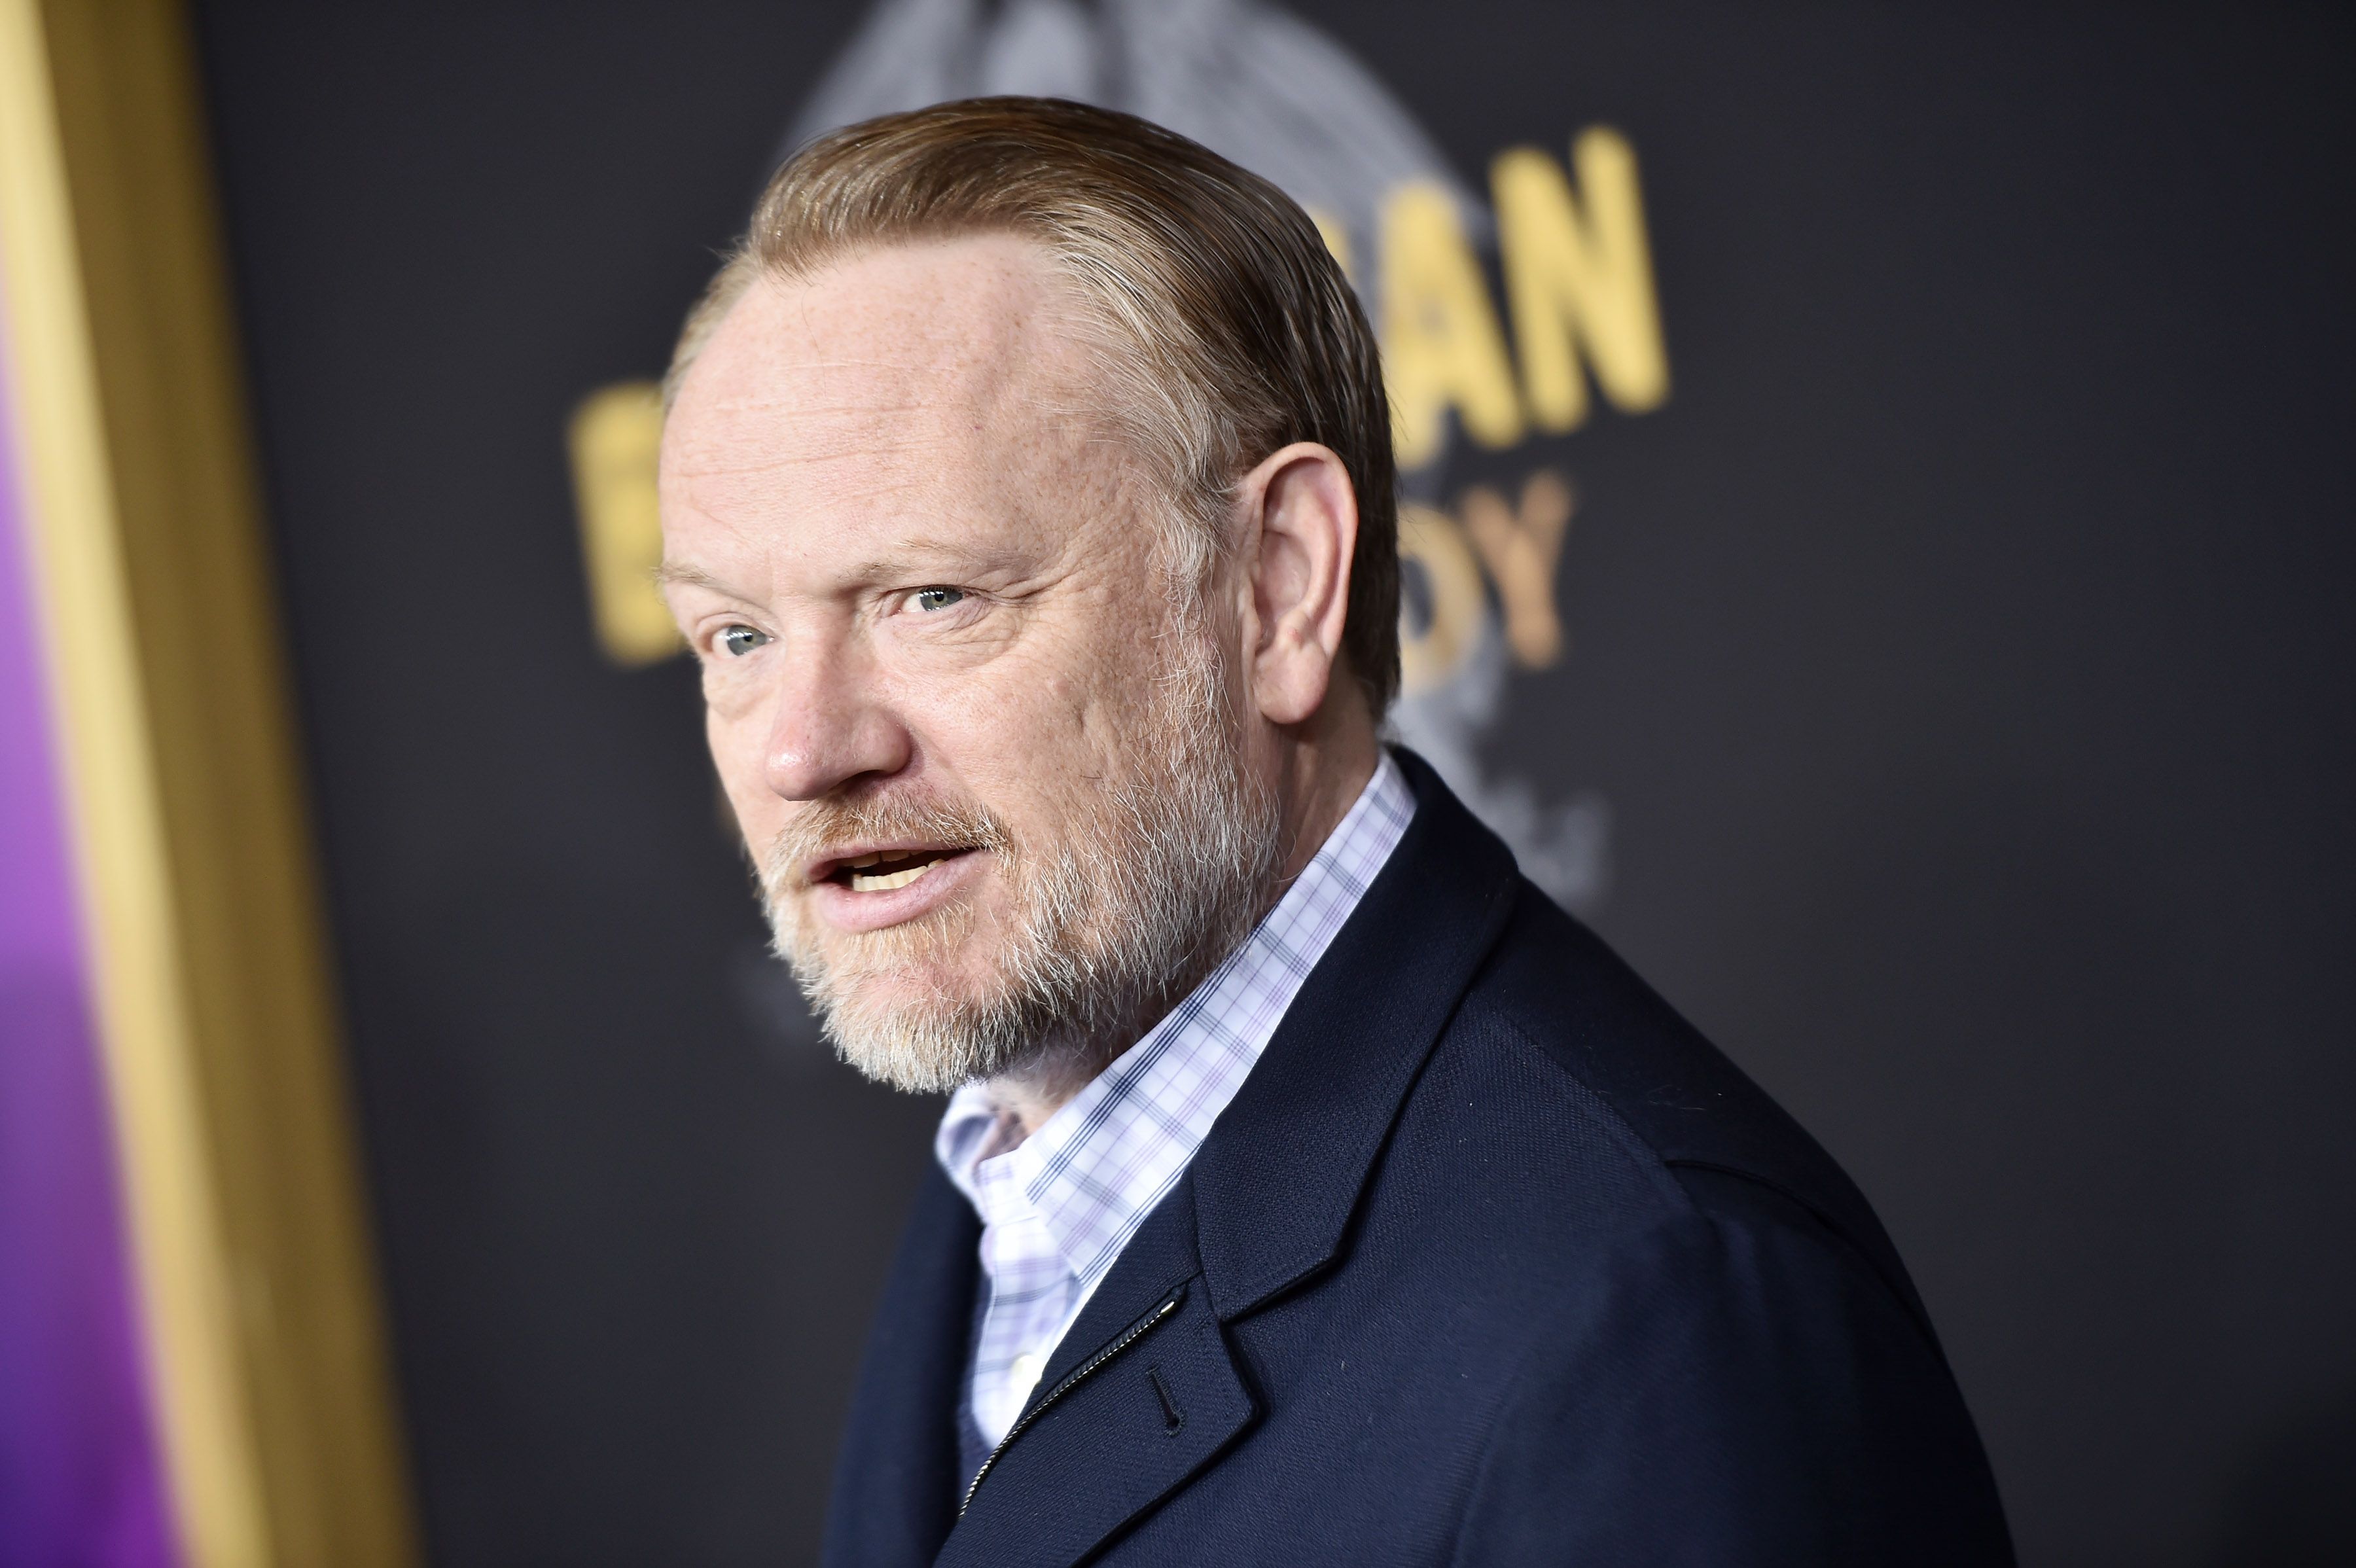 Jared Harris at the "Bohemian Rhapsody" New York Premiere held at The Paris Theatre on October 30, 2018,  in New York City | Photo: Steven Ferdman/Getty Images